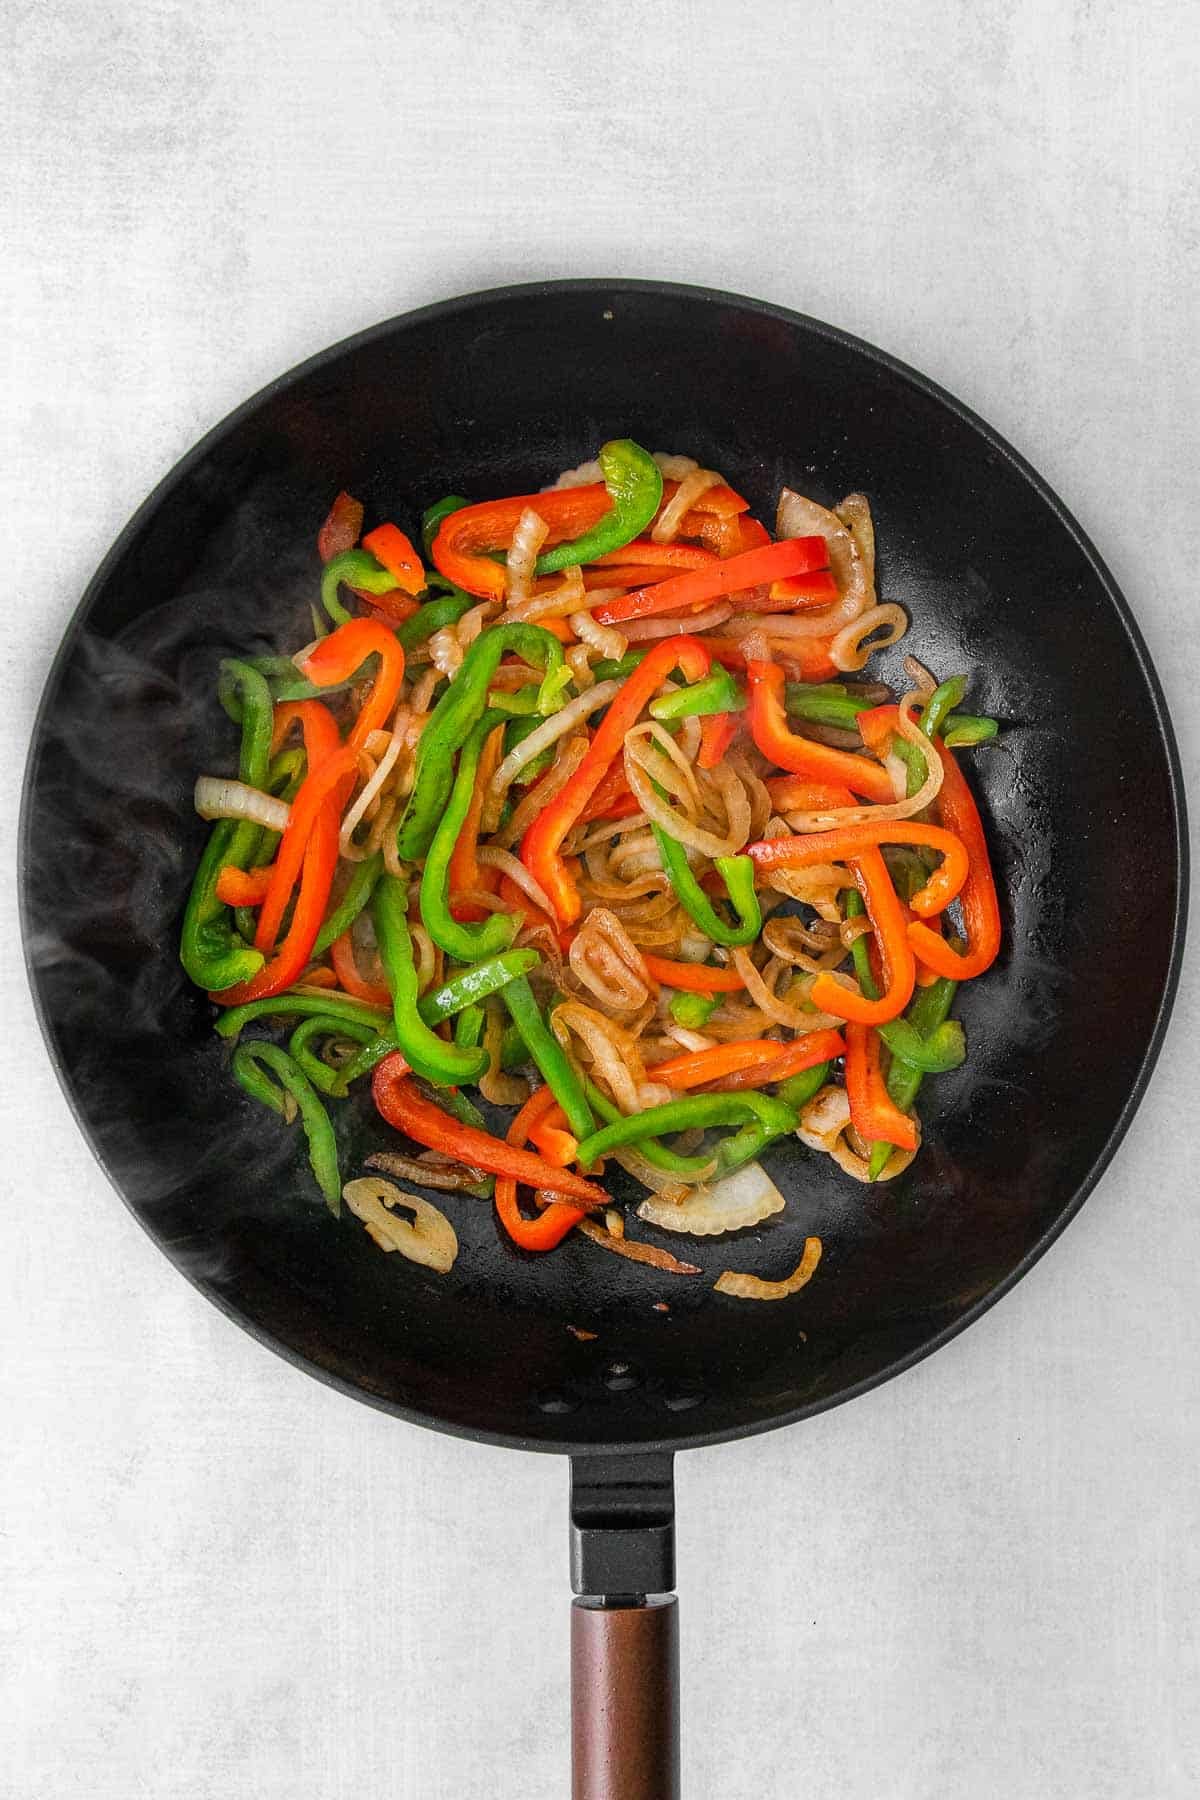 Sliced onion and sliced bell peppers in skillet.